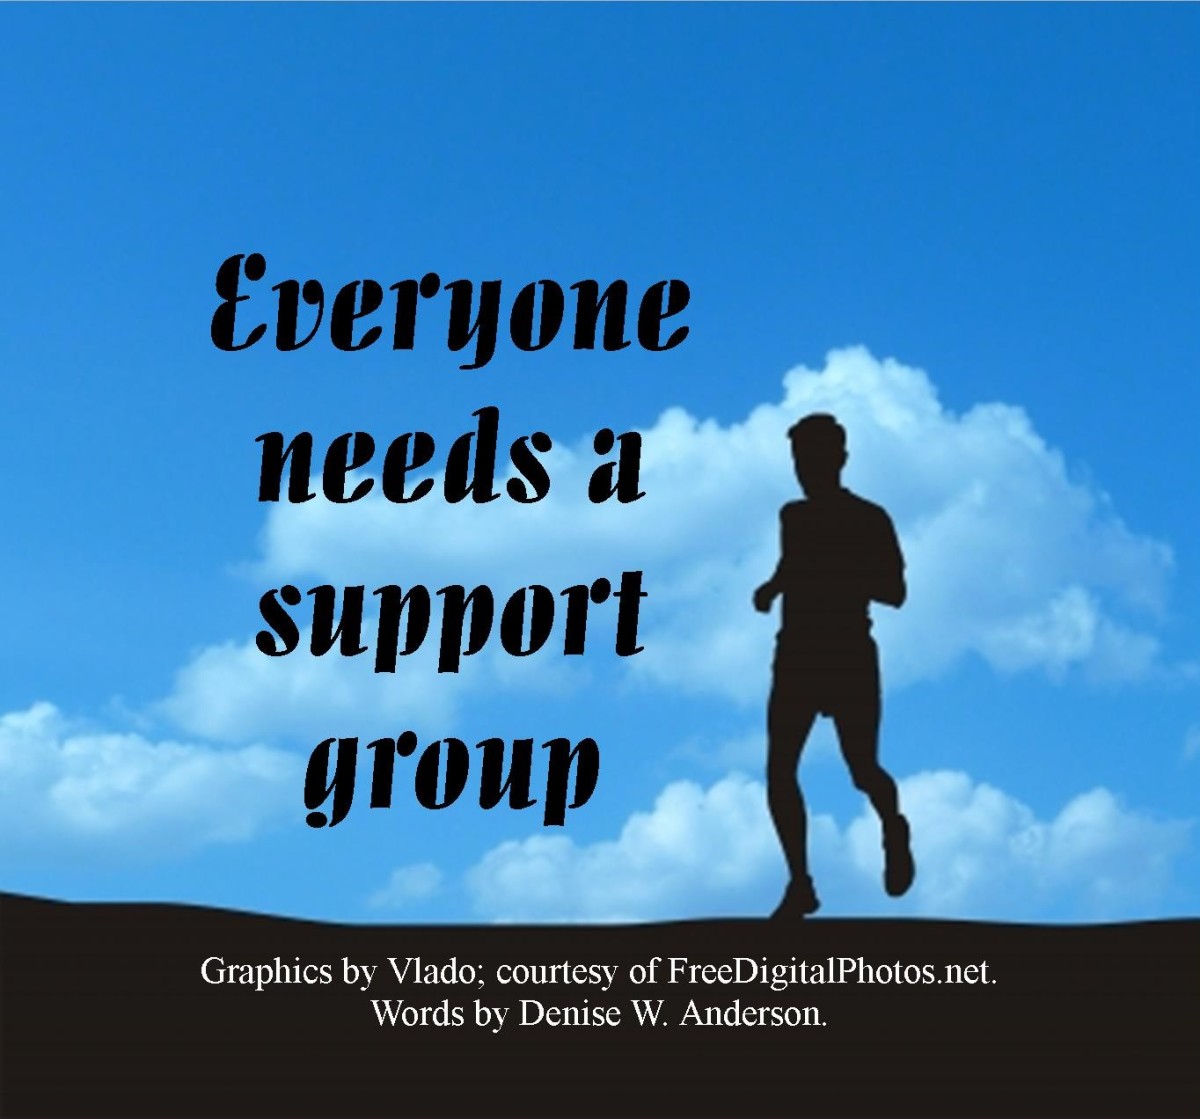 Although at times, we make it on our own, no one is immune from the need for support.